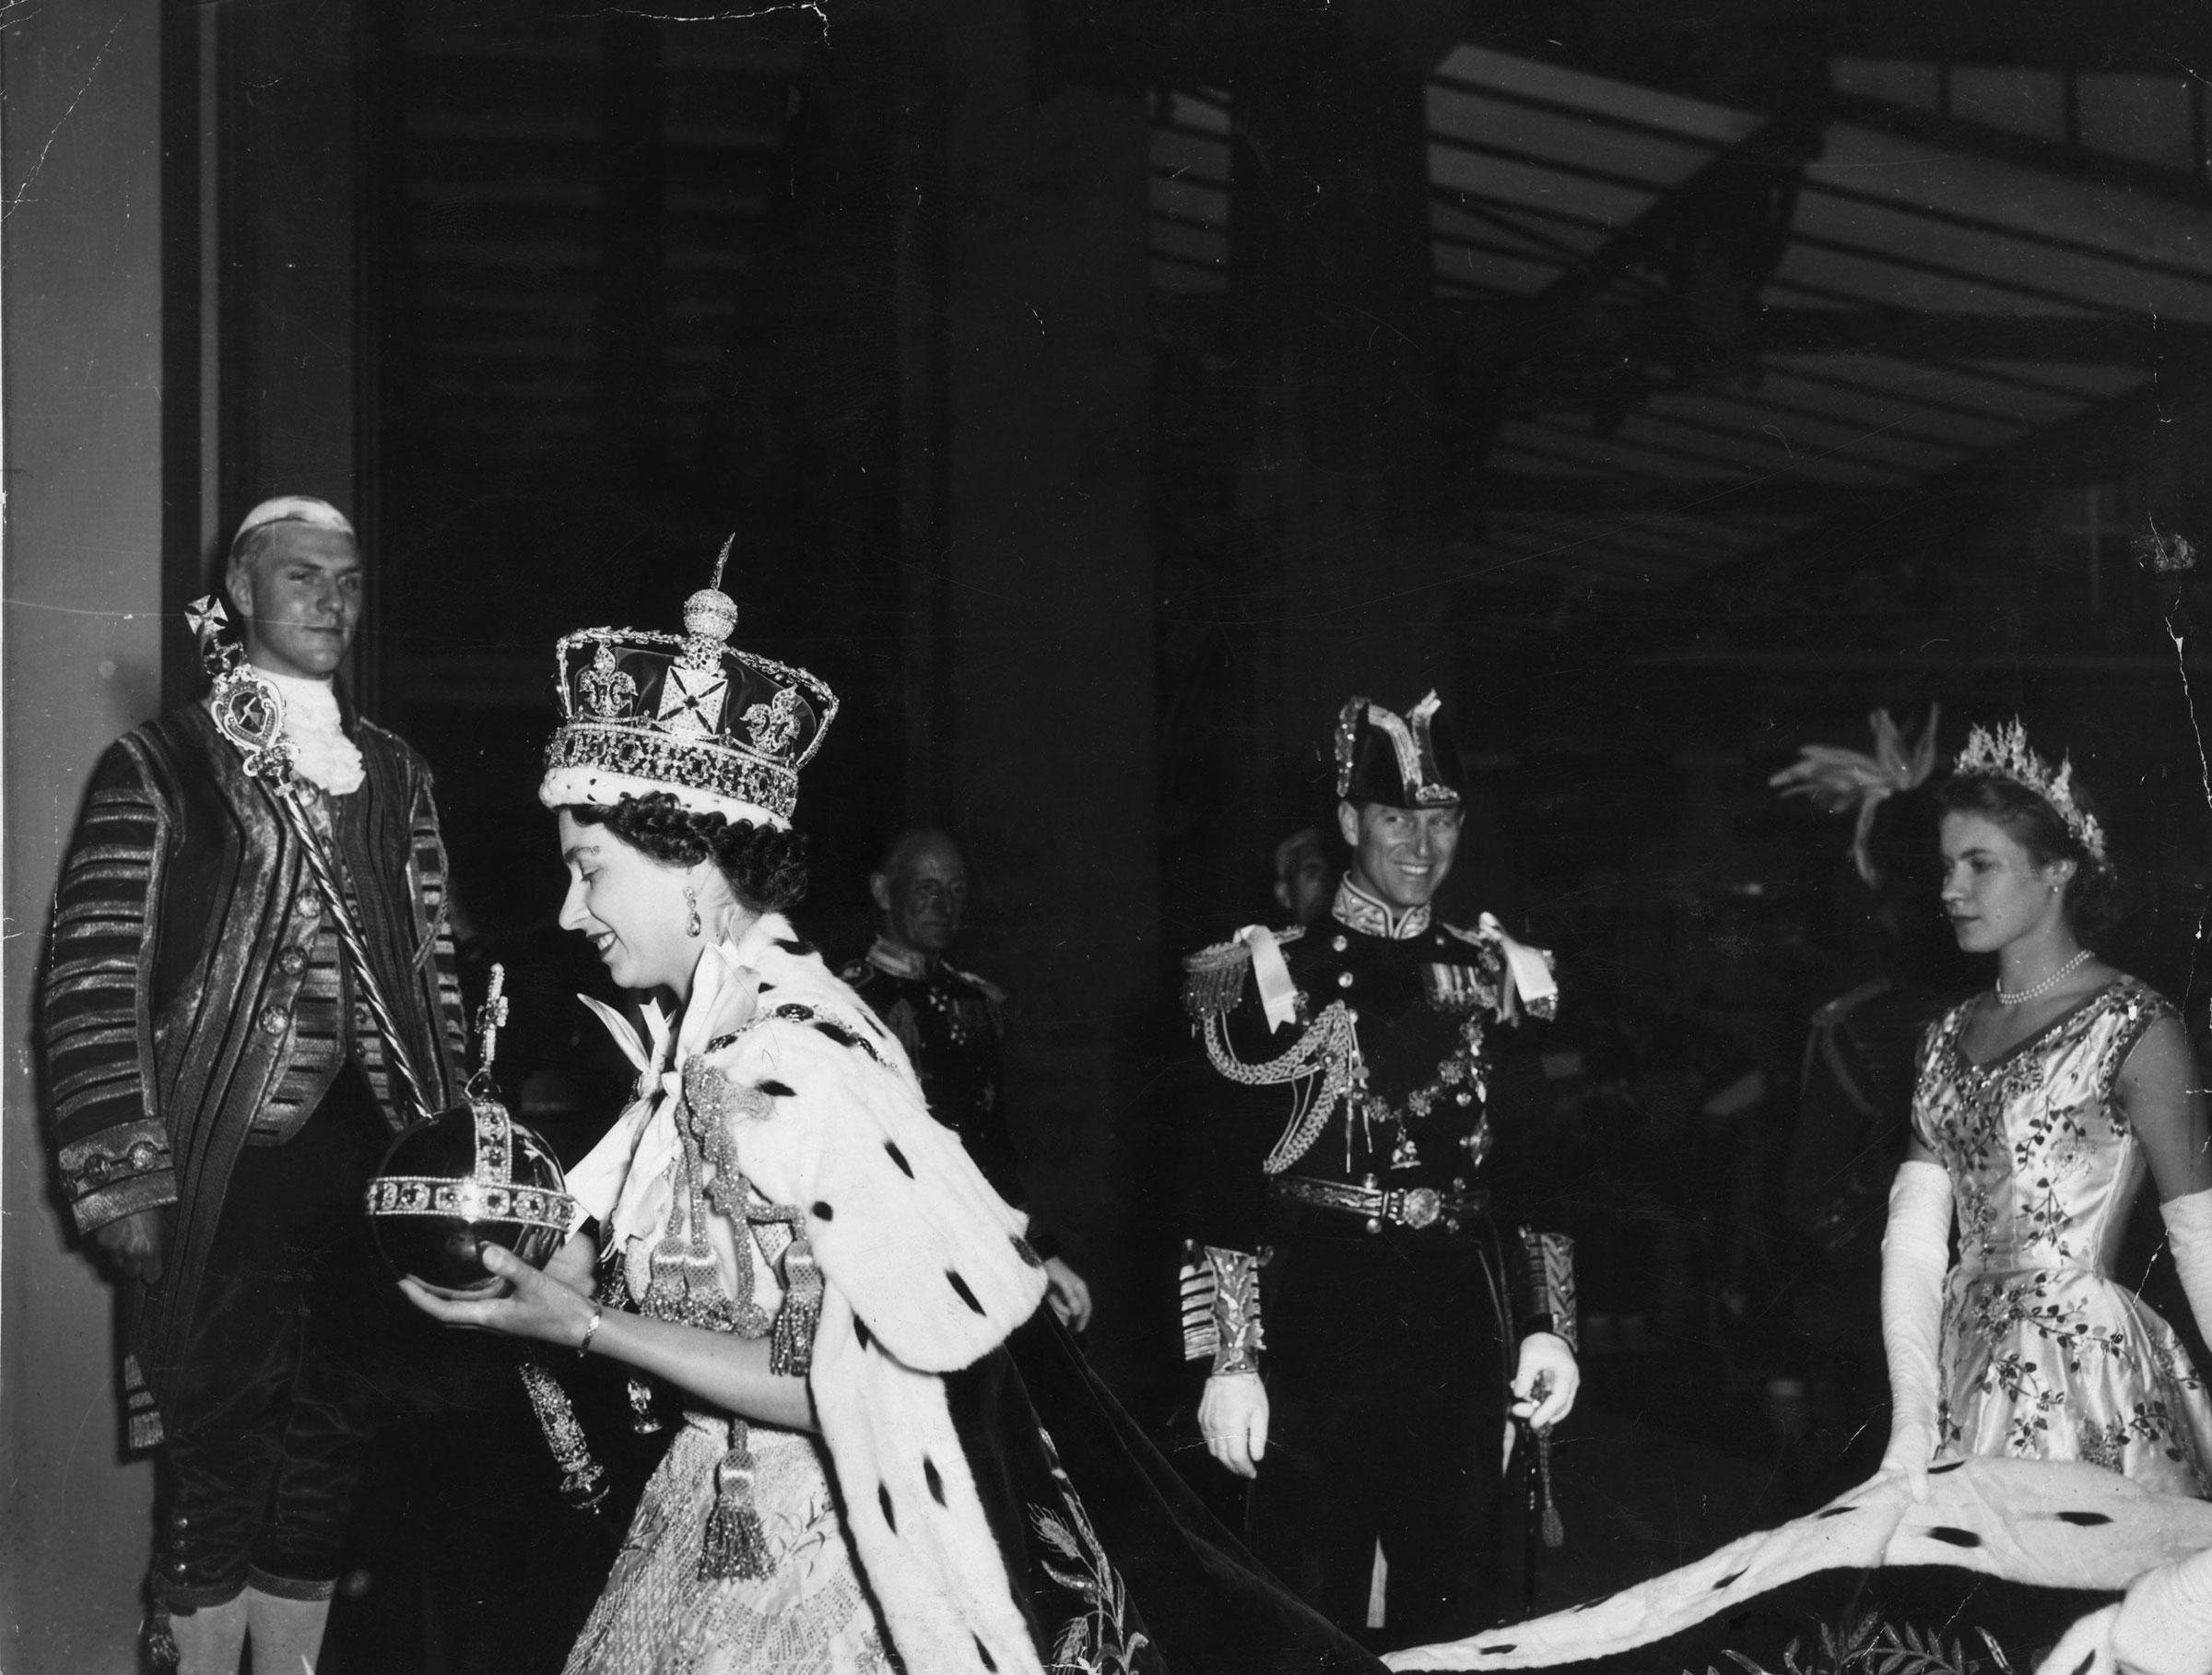 Queen Elizabeth II, wearing the Imperial State crown and carrying the Orb and Sceptre, returns to Buckingham Palace from Westminster Abbey, London, following her Coronation.